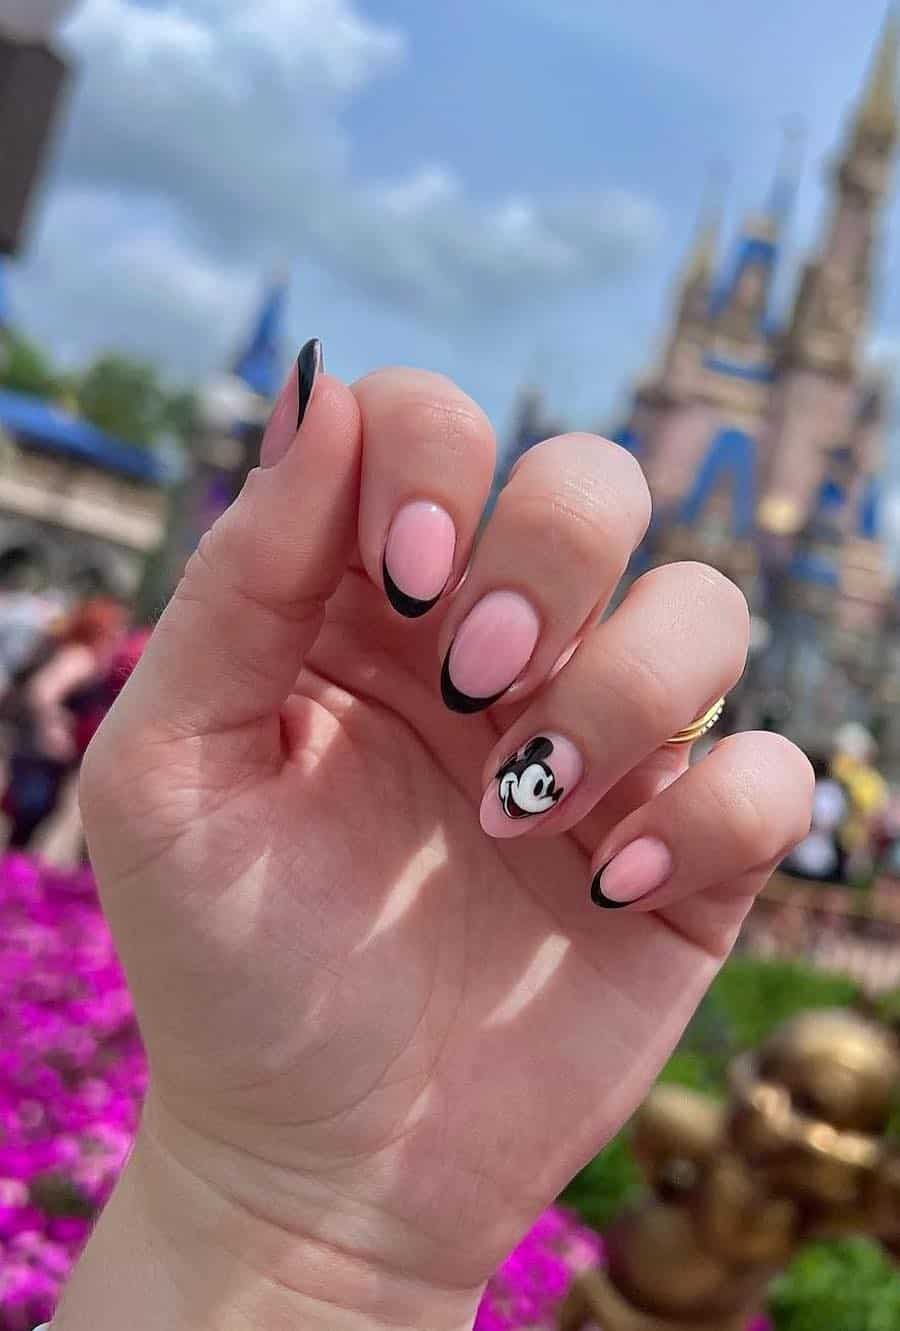 Medium almond nails with a Mickey Mouse design featuring soft pink polish, black tips, and Mickey nail art